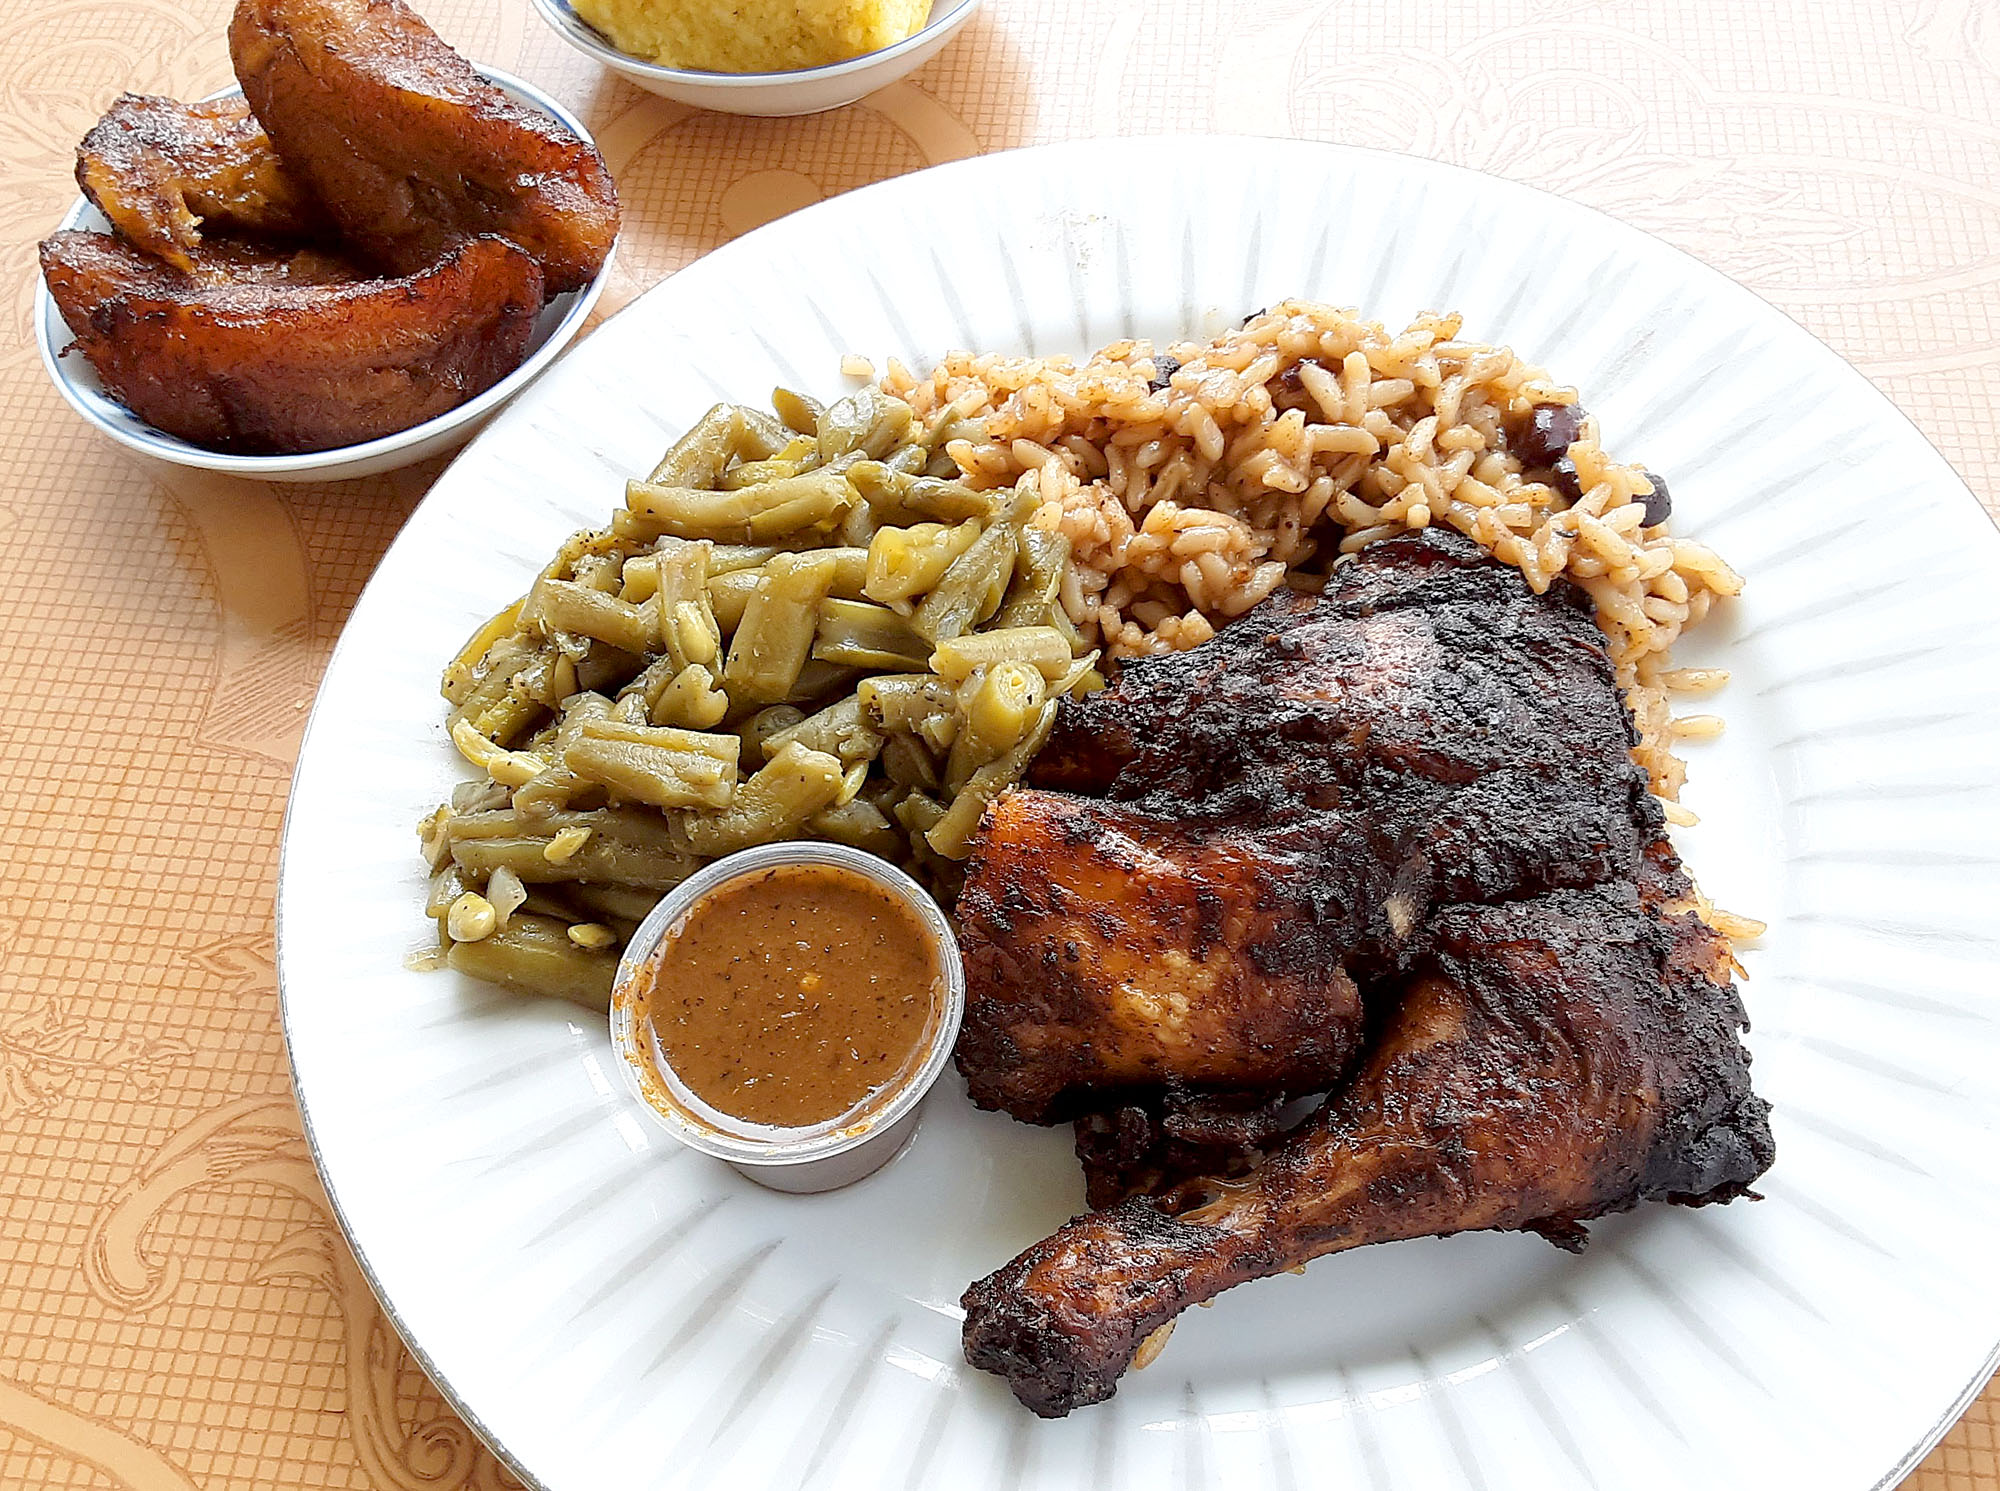 On a white plate, there is jerk chicken with the bone in, green beans, and a little bit of rice. Photo by Paul Young.